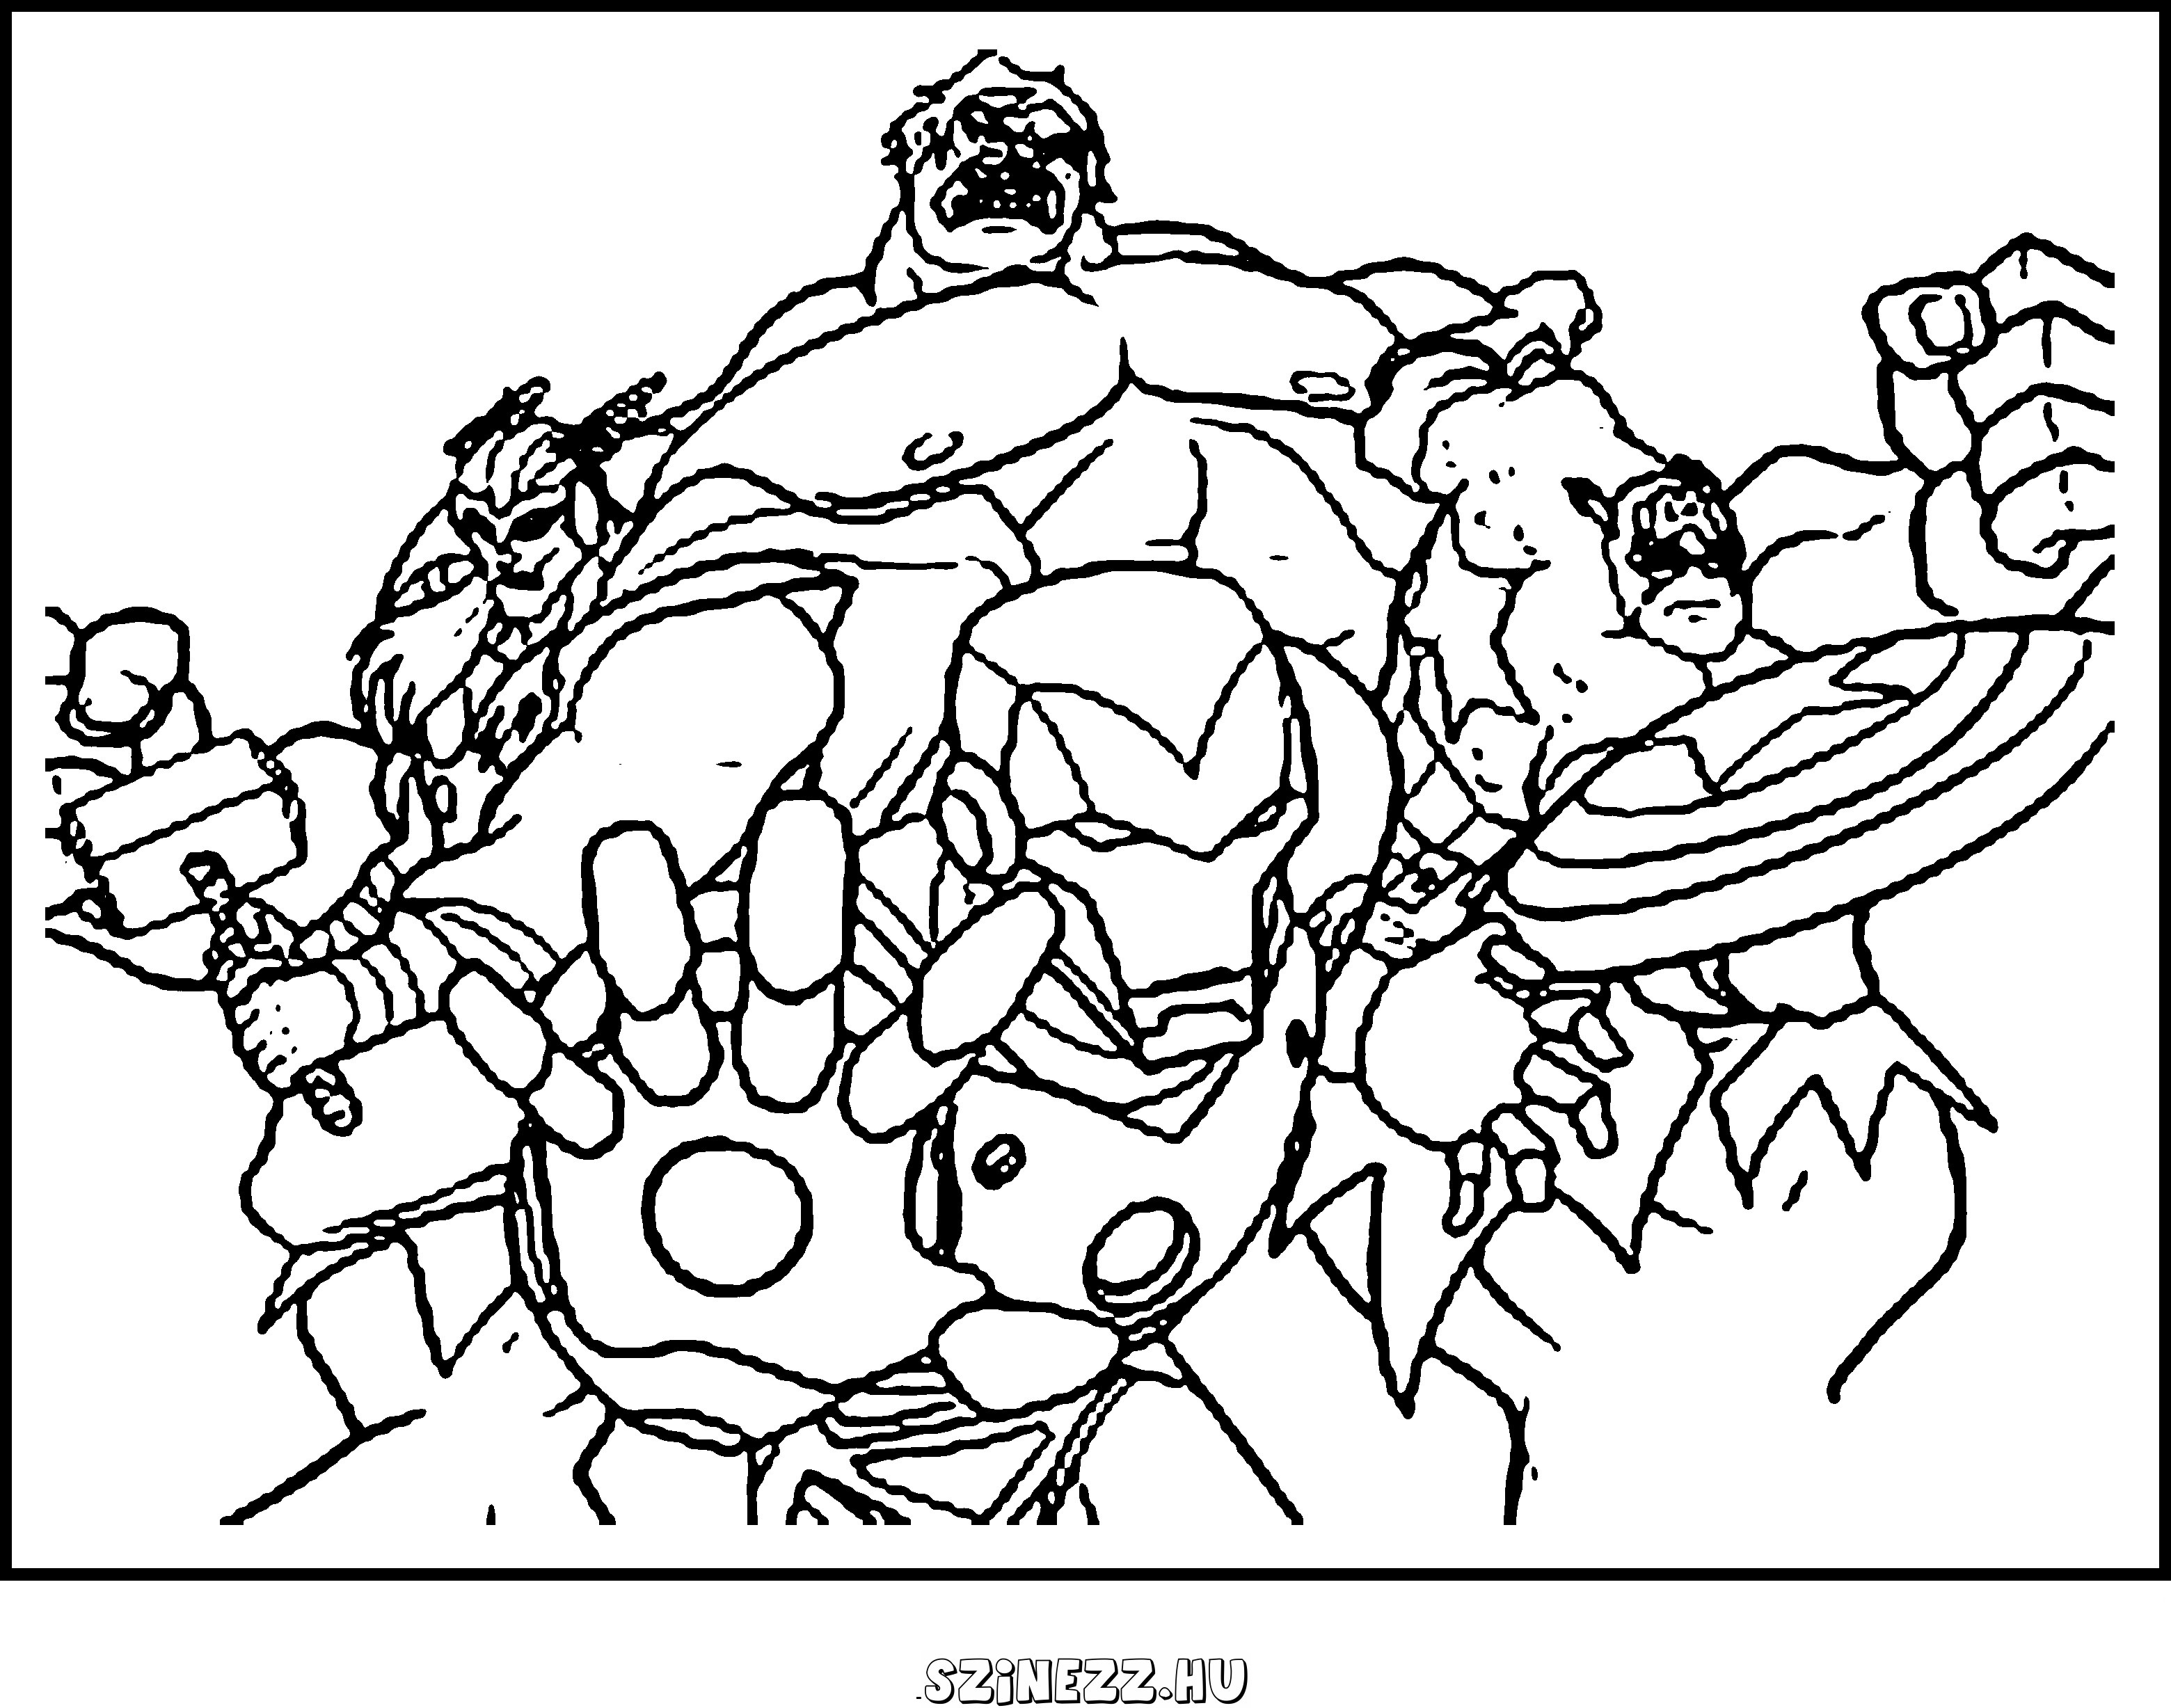 Avengers coloring pages ginormasource kids